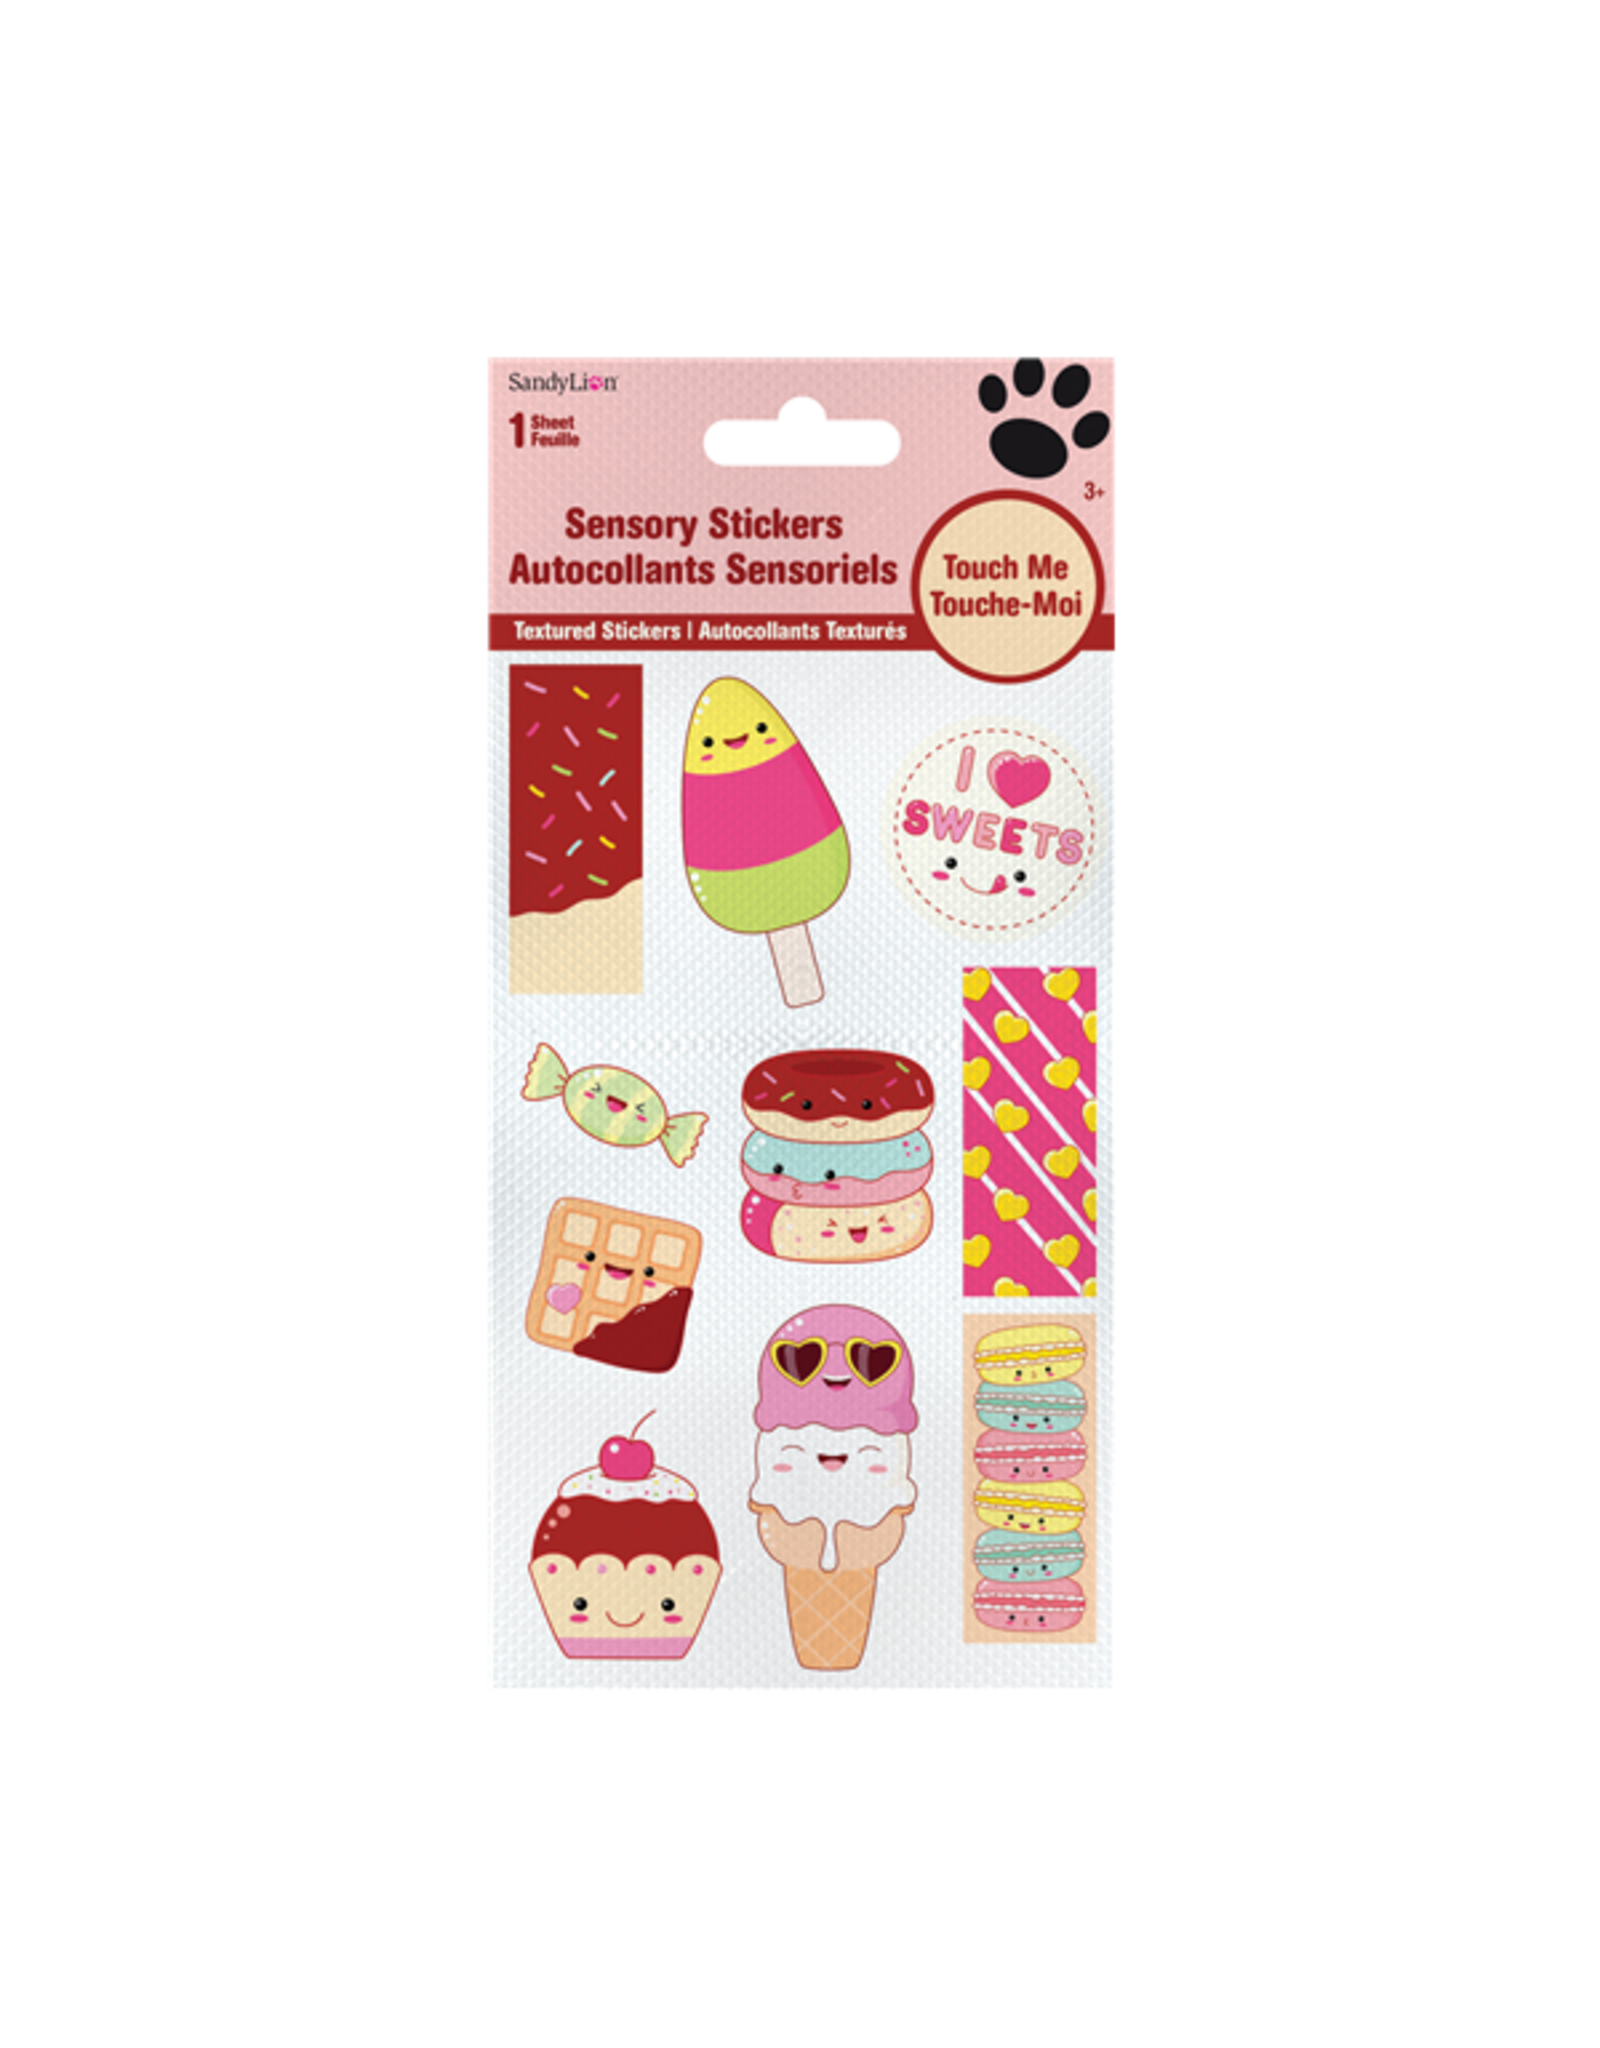 Sweet Treats - Popsicles, Cupcakes, Candy Donuts Sensory Stickers